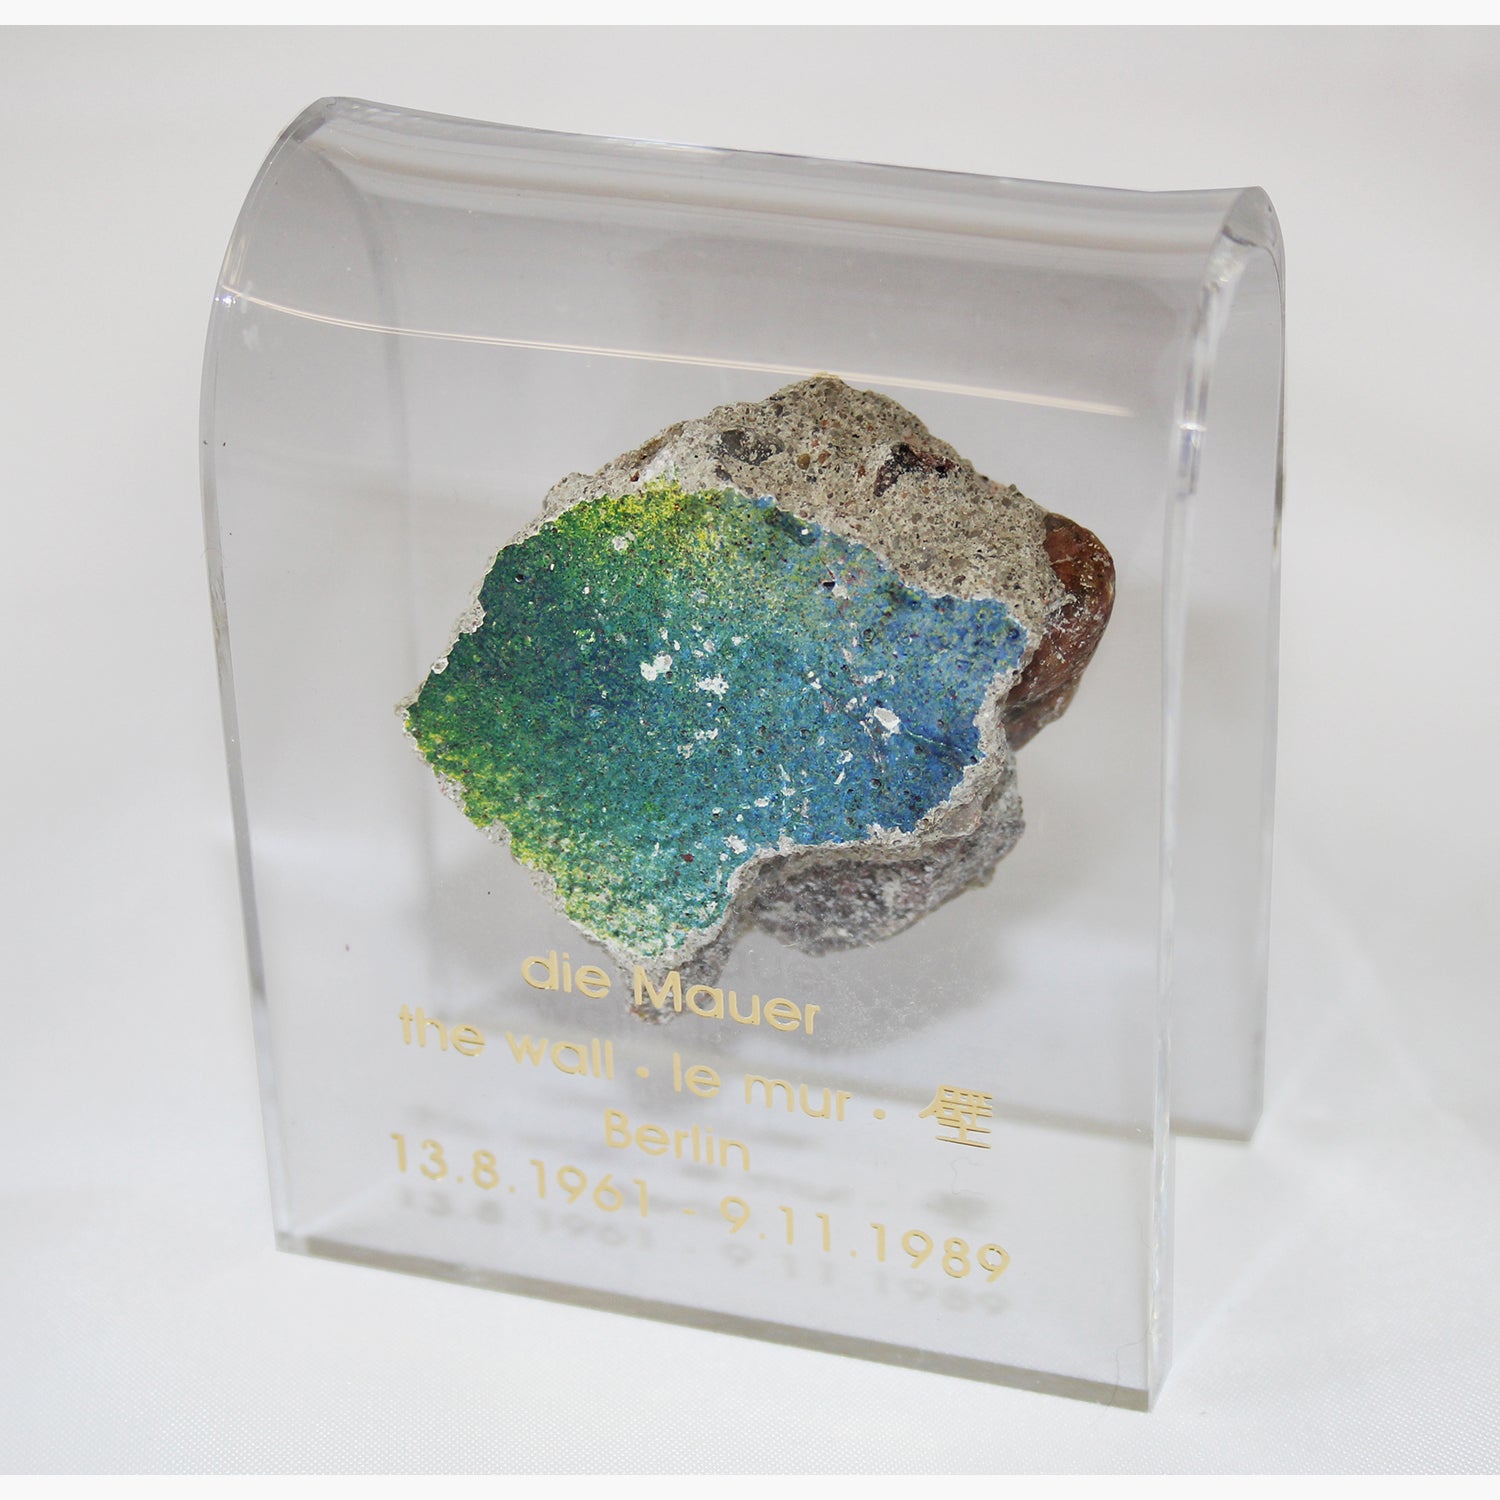 A Piece of the Berlin Wall in an Acrylic Display - Size M